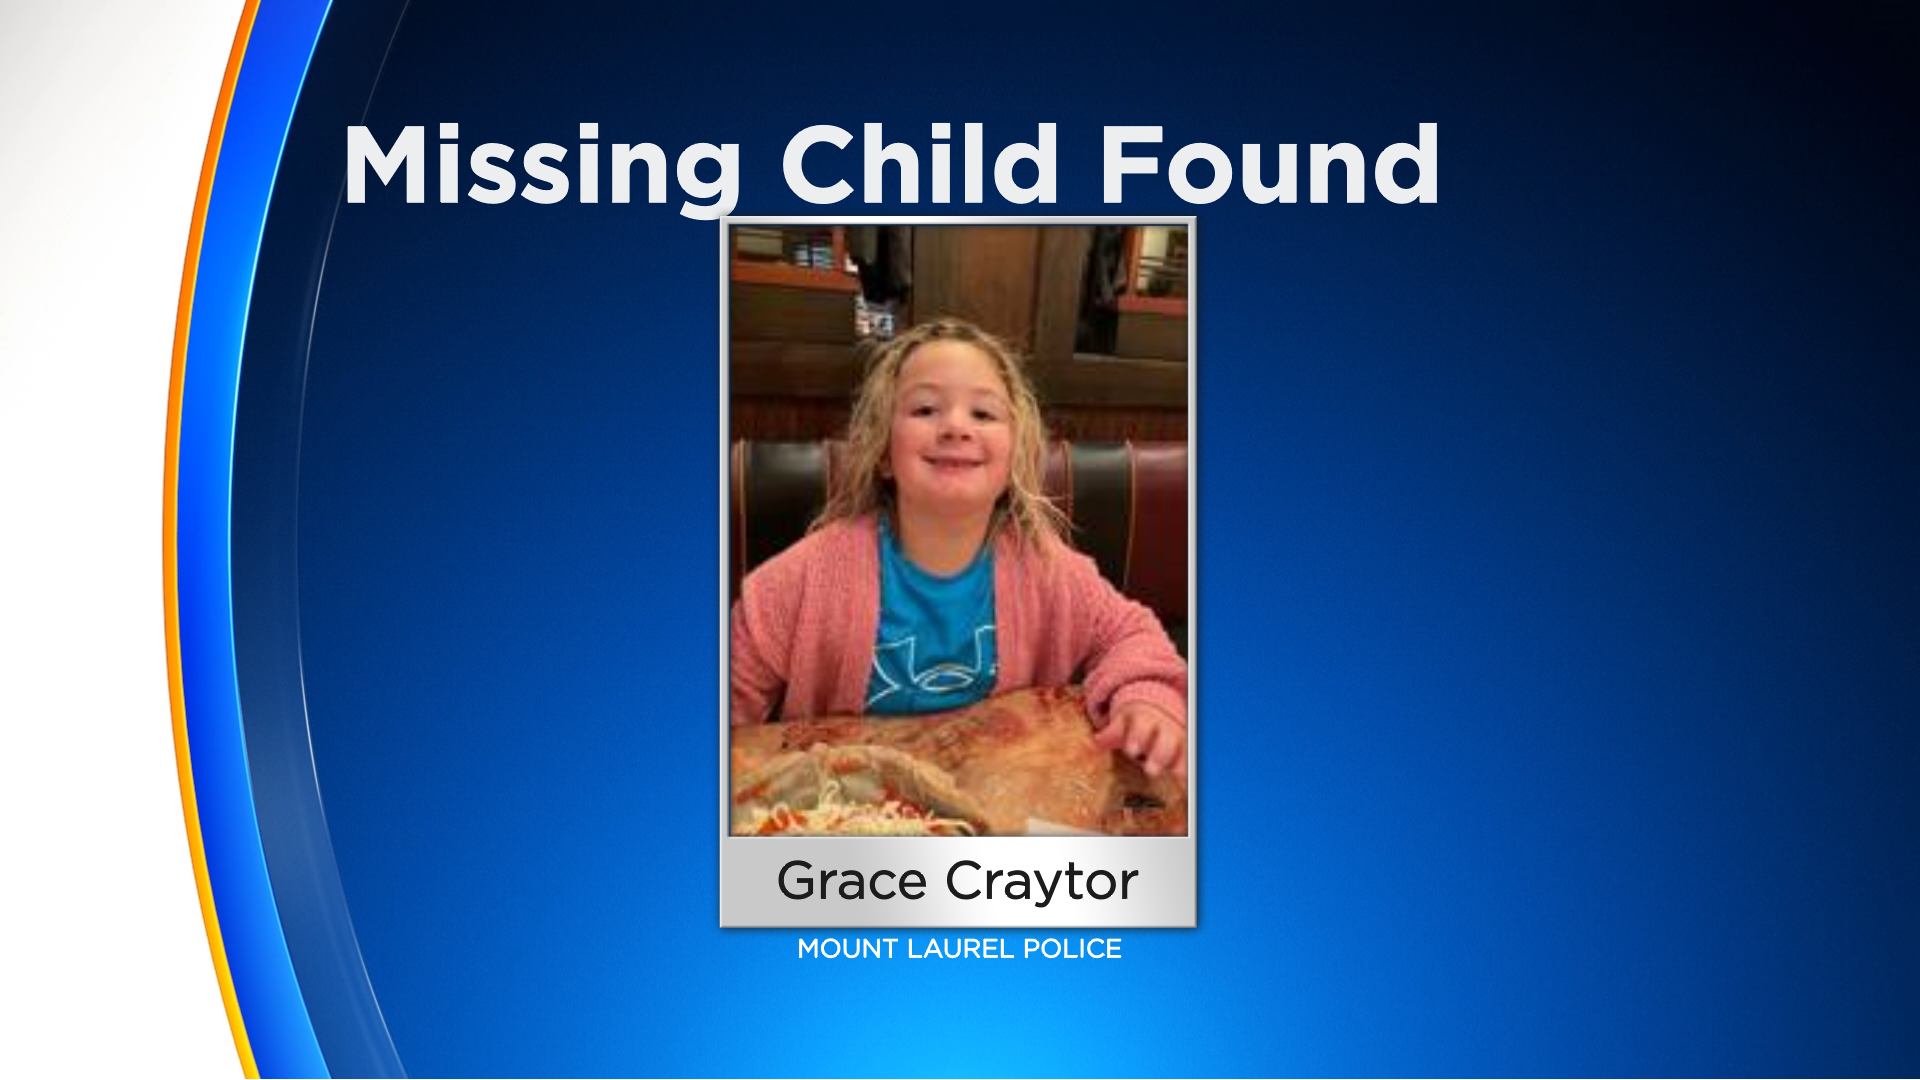 6-Year-Old Grace Craytor Has Been Found Safely, Police Say